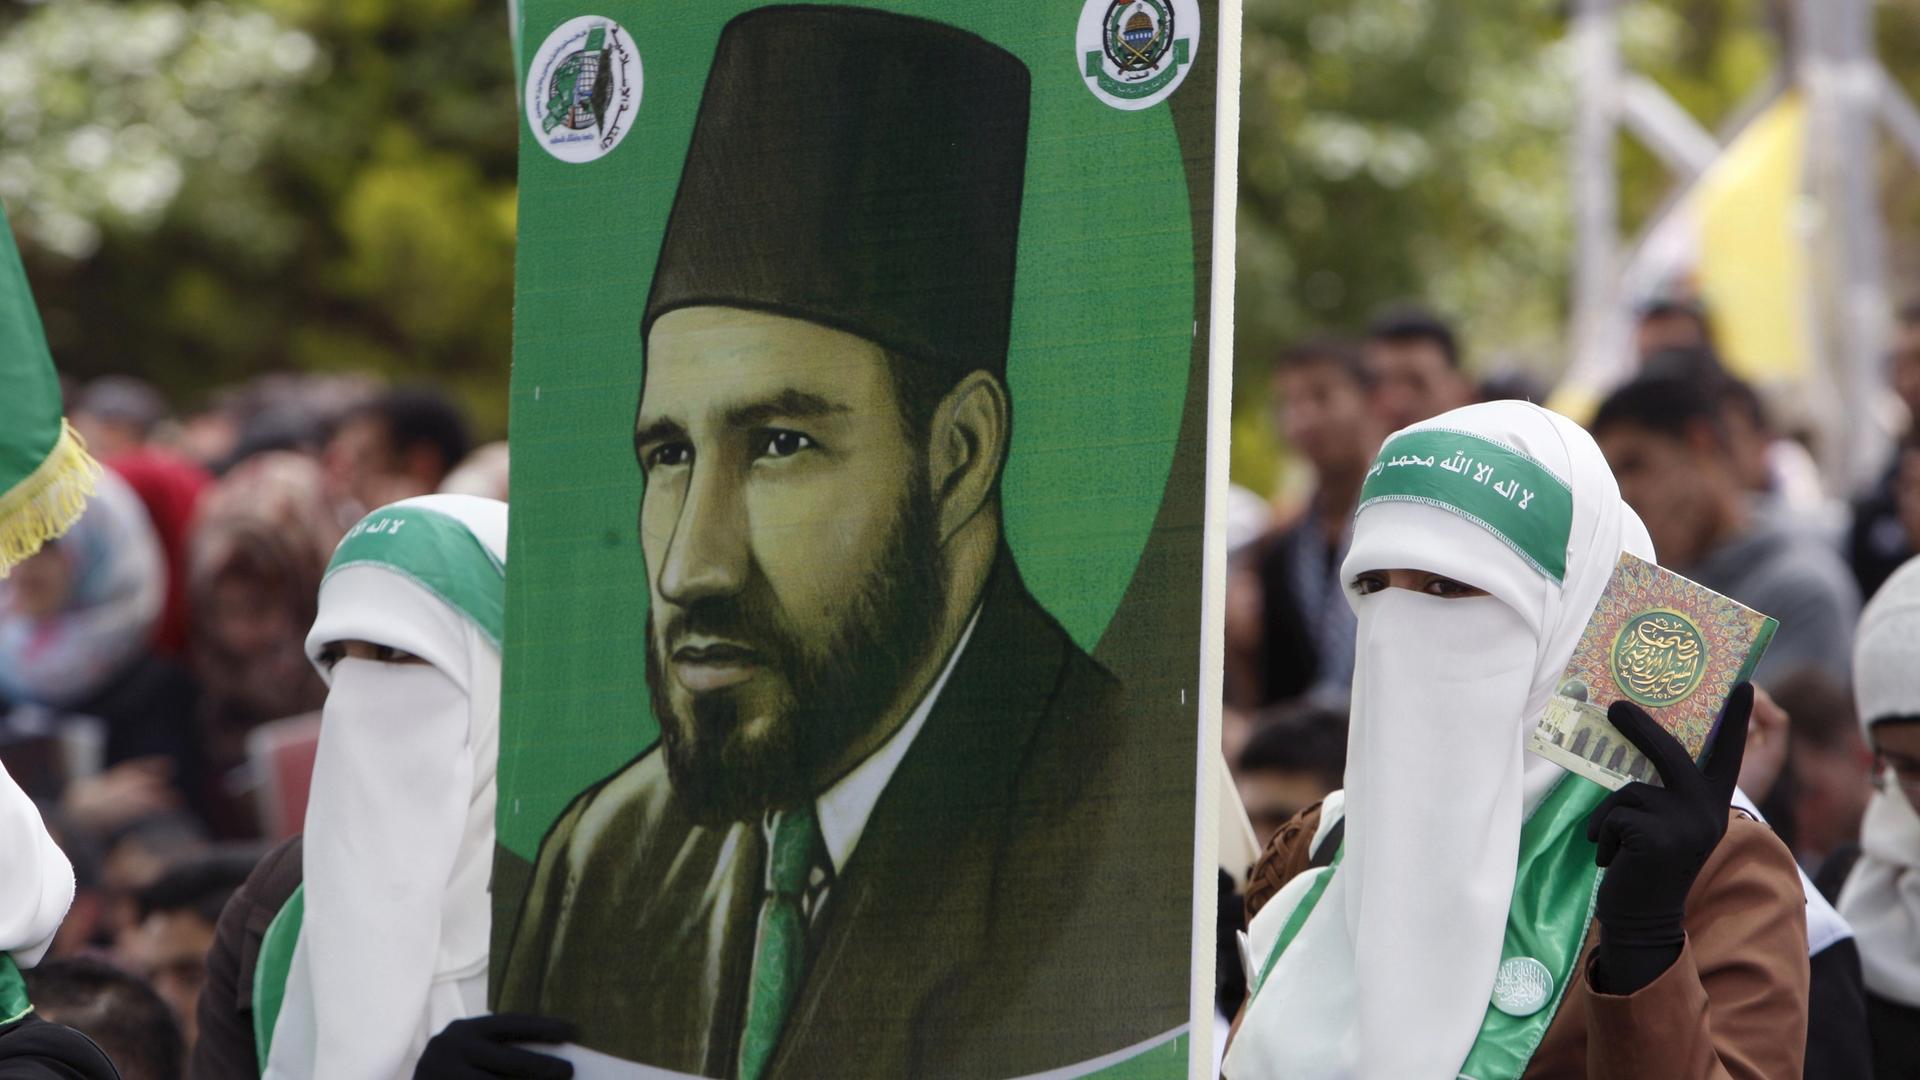 Palestinian students supporting the  militant group Hamas, an organization that's ideologically linked to the Muslim Brotherhood, hold a poster depicting Hassan Al-Banna, the Muslim Brotherhood founder, during an election campaign for students' council at